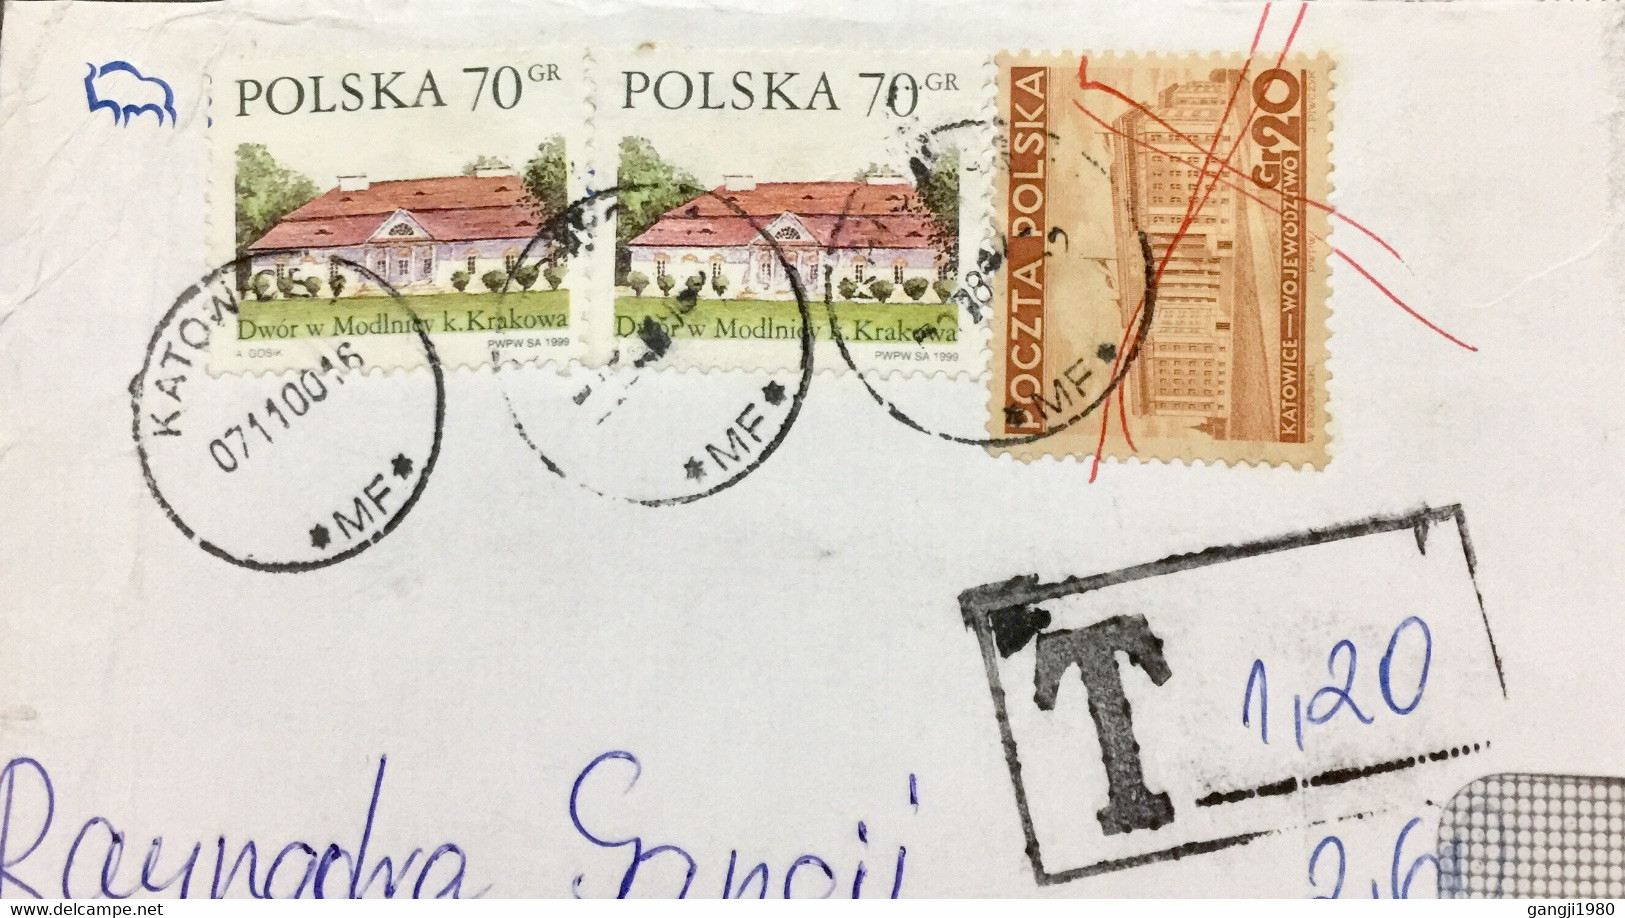 POLAND 2000, REUSED COVER 1935, BUILDING STAMP USED NOT ACCEPTED SO DUE ,”T” IN BOXED 3 STAMPS KATOWCE  & ŁÓDŹ CANCELLAT - Lettres & Documents